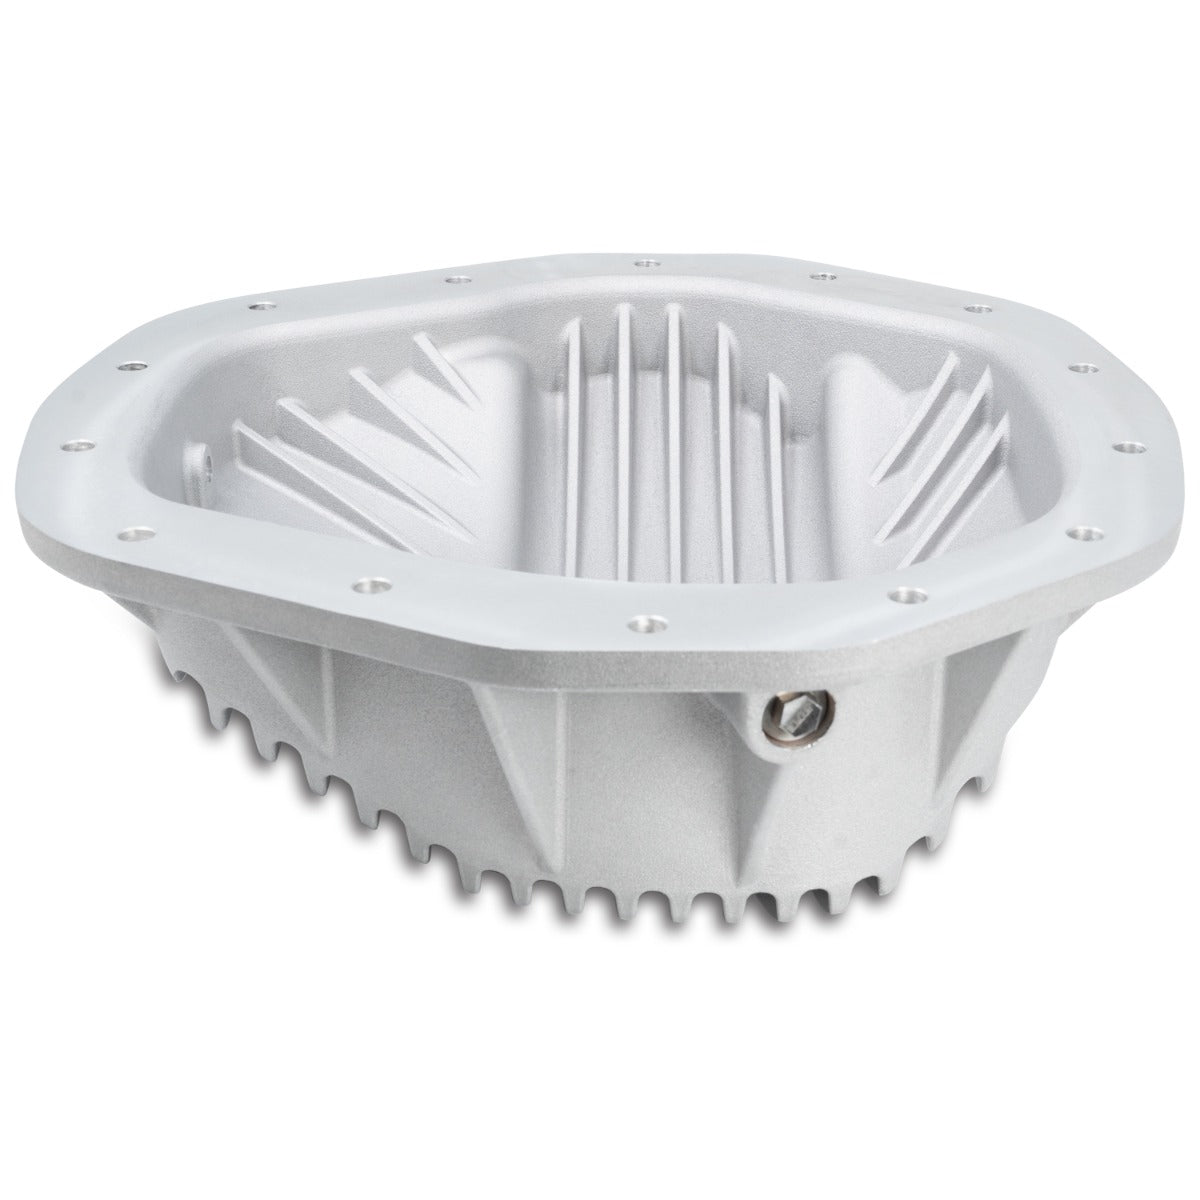 PPE Diesel 2020-2022 GM 6.6L Duramax 11.5 Inch /12 Inch -14 Heavy-Duty Cast Aluminum Rear Differential Cover Raw 138053000